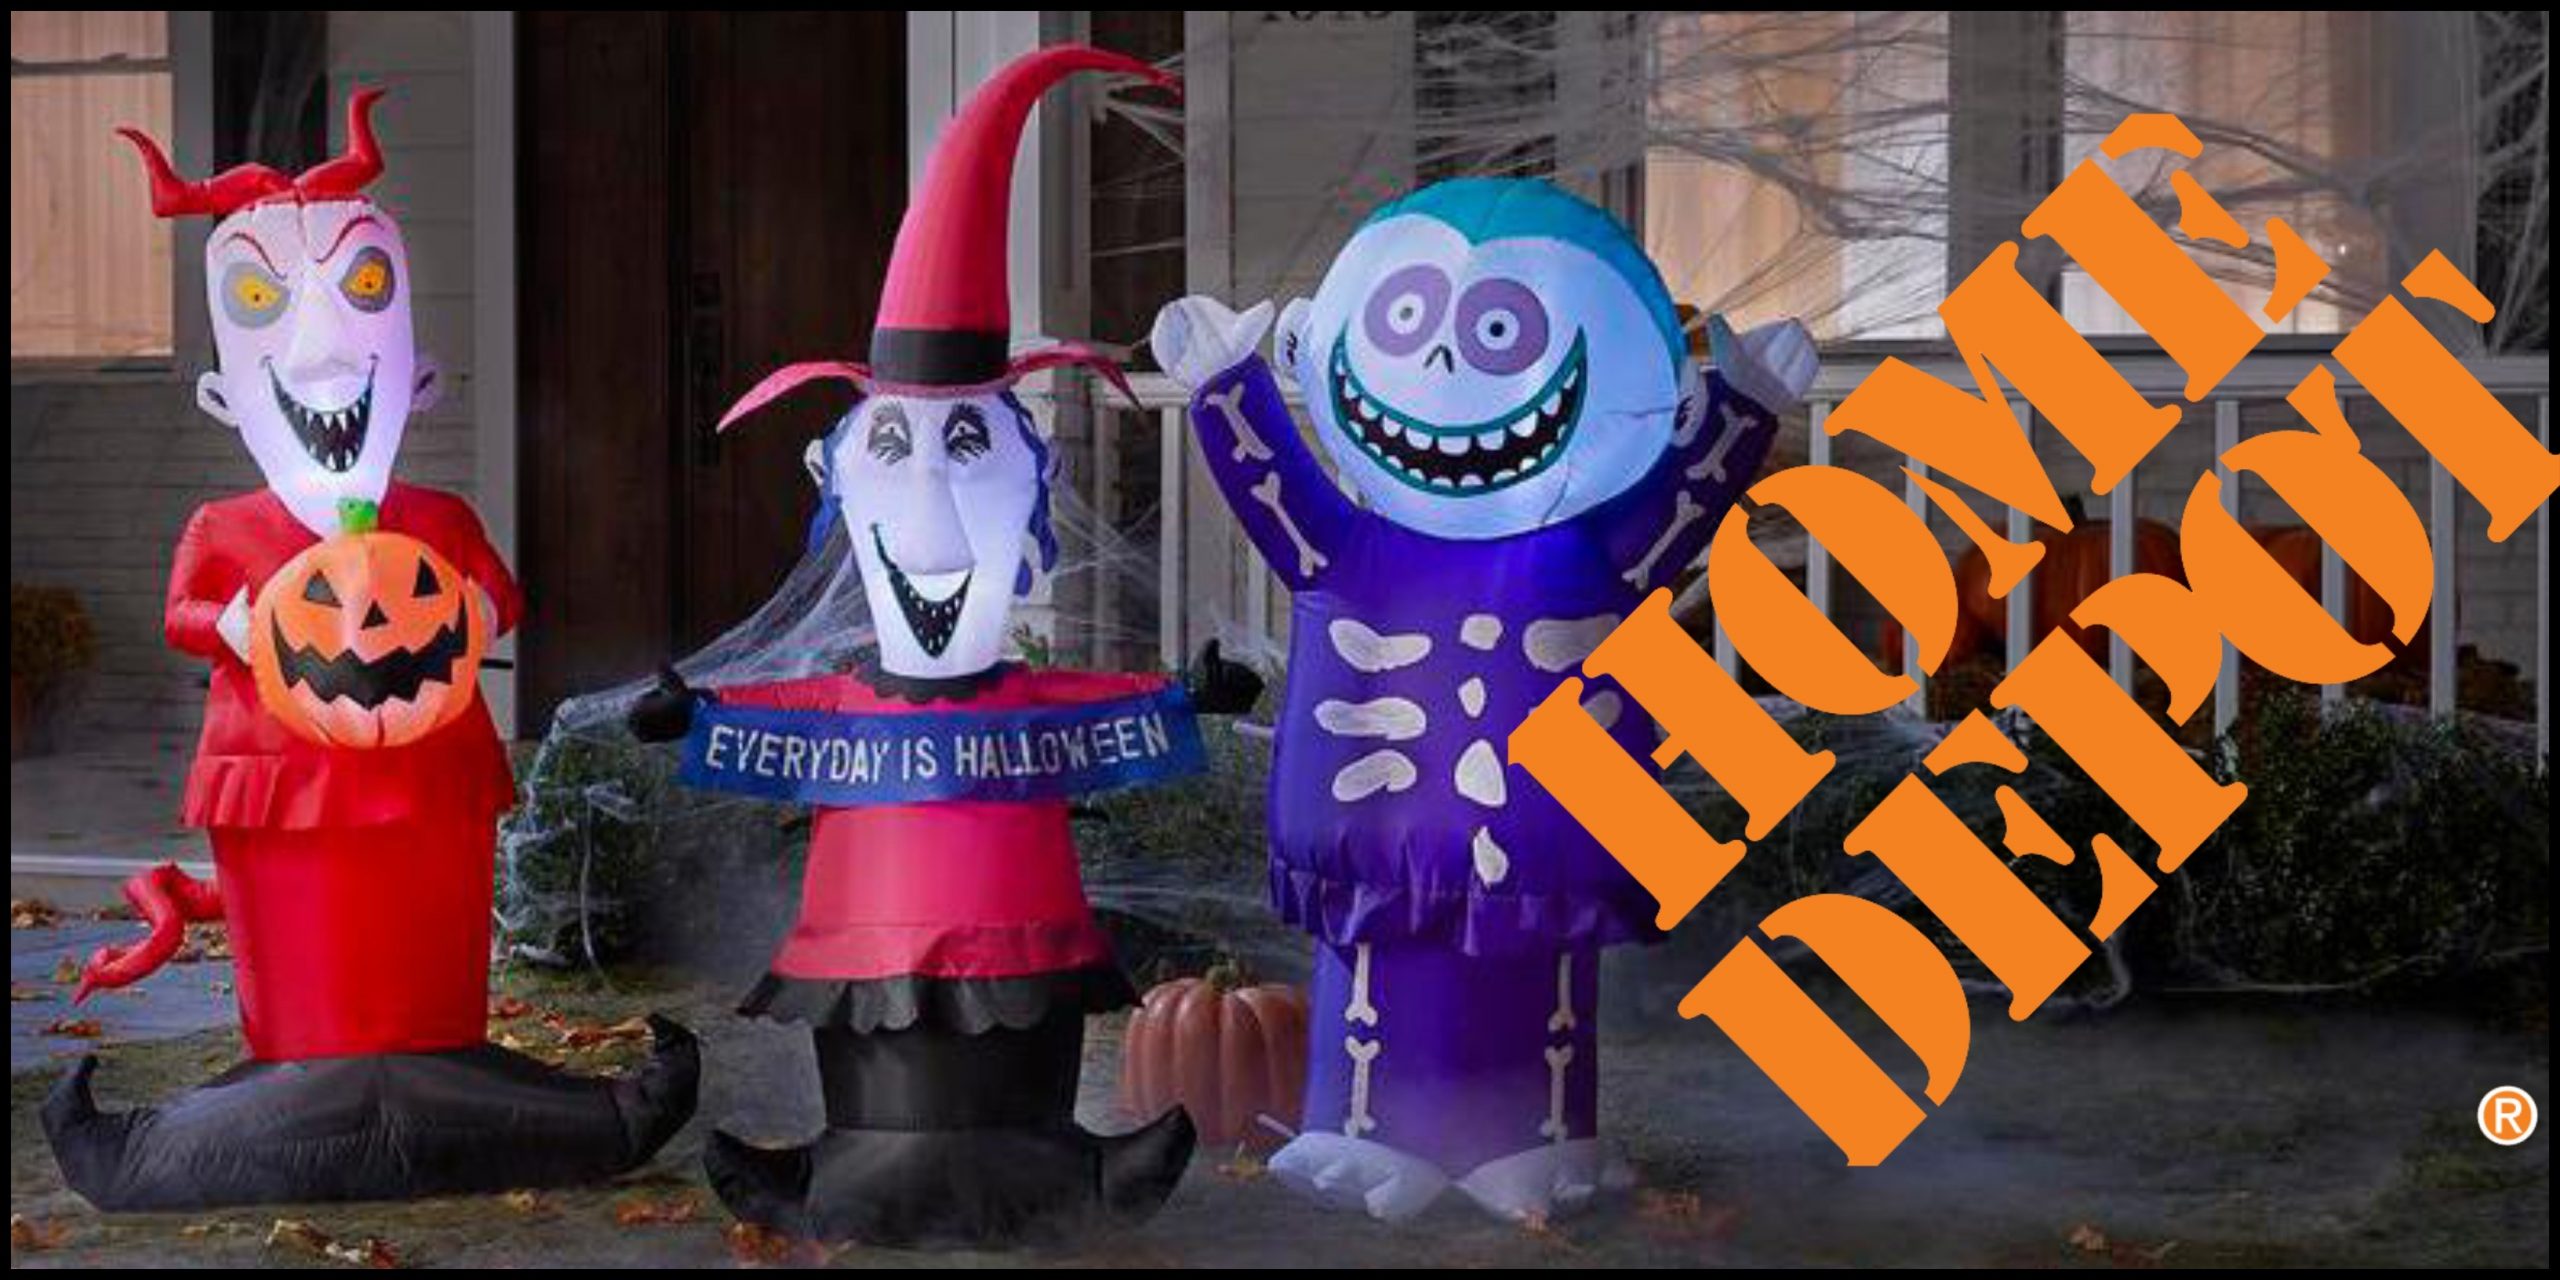 Home Depot Releases ‘Nightmare Before Christmas’ Inflatables for Halloween